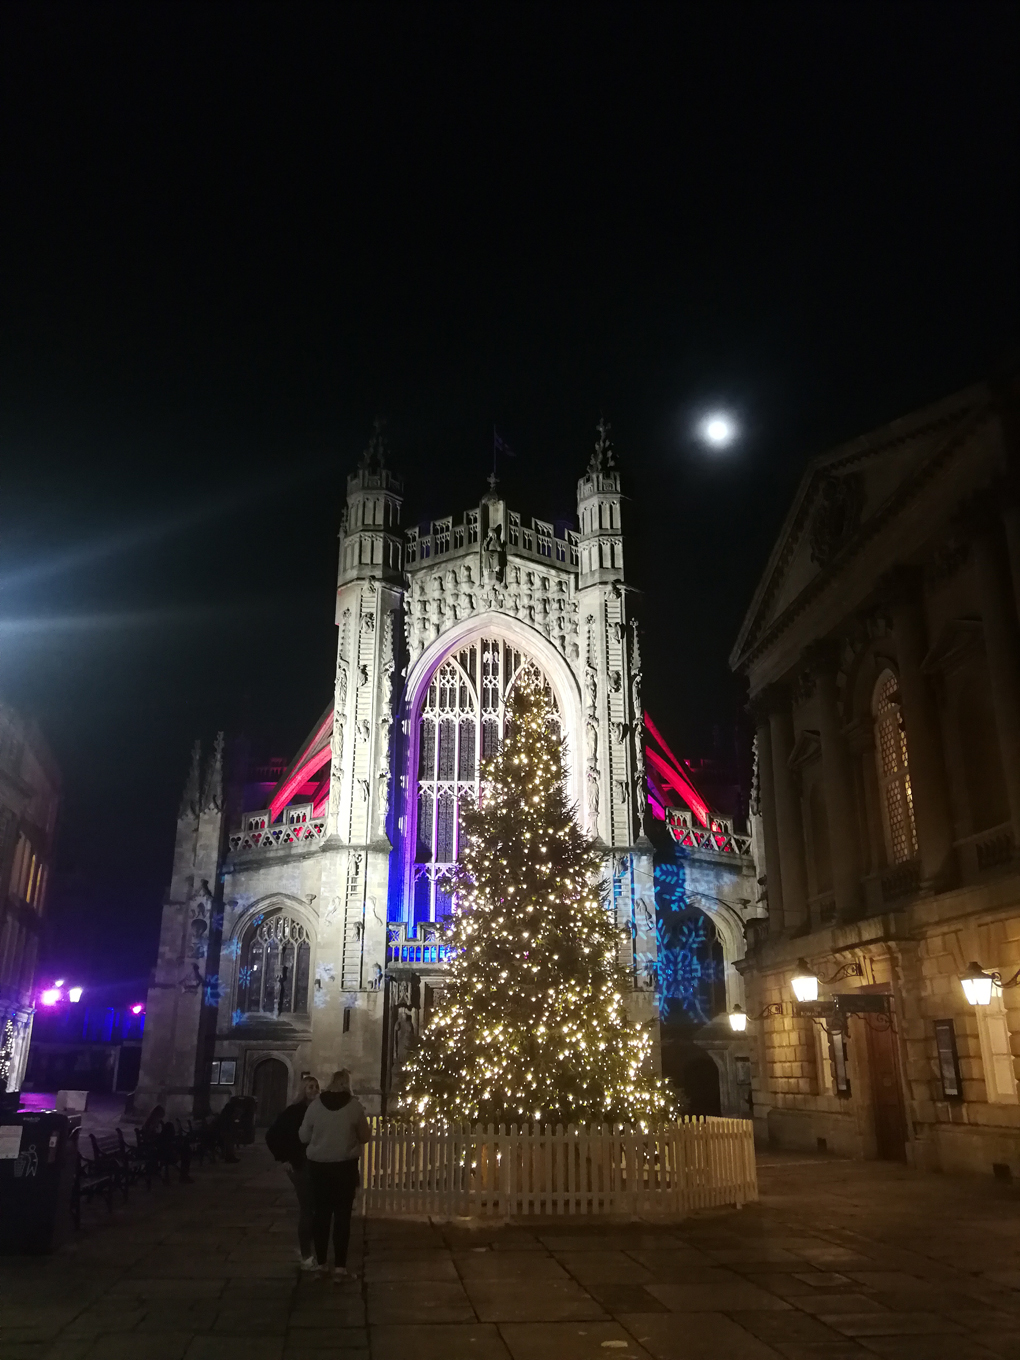 Bath Abbey lit up in blue and red with a lit up Christmas tree in front